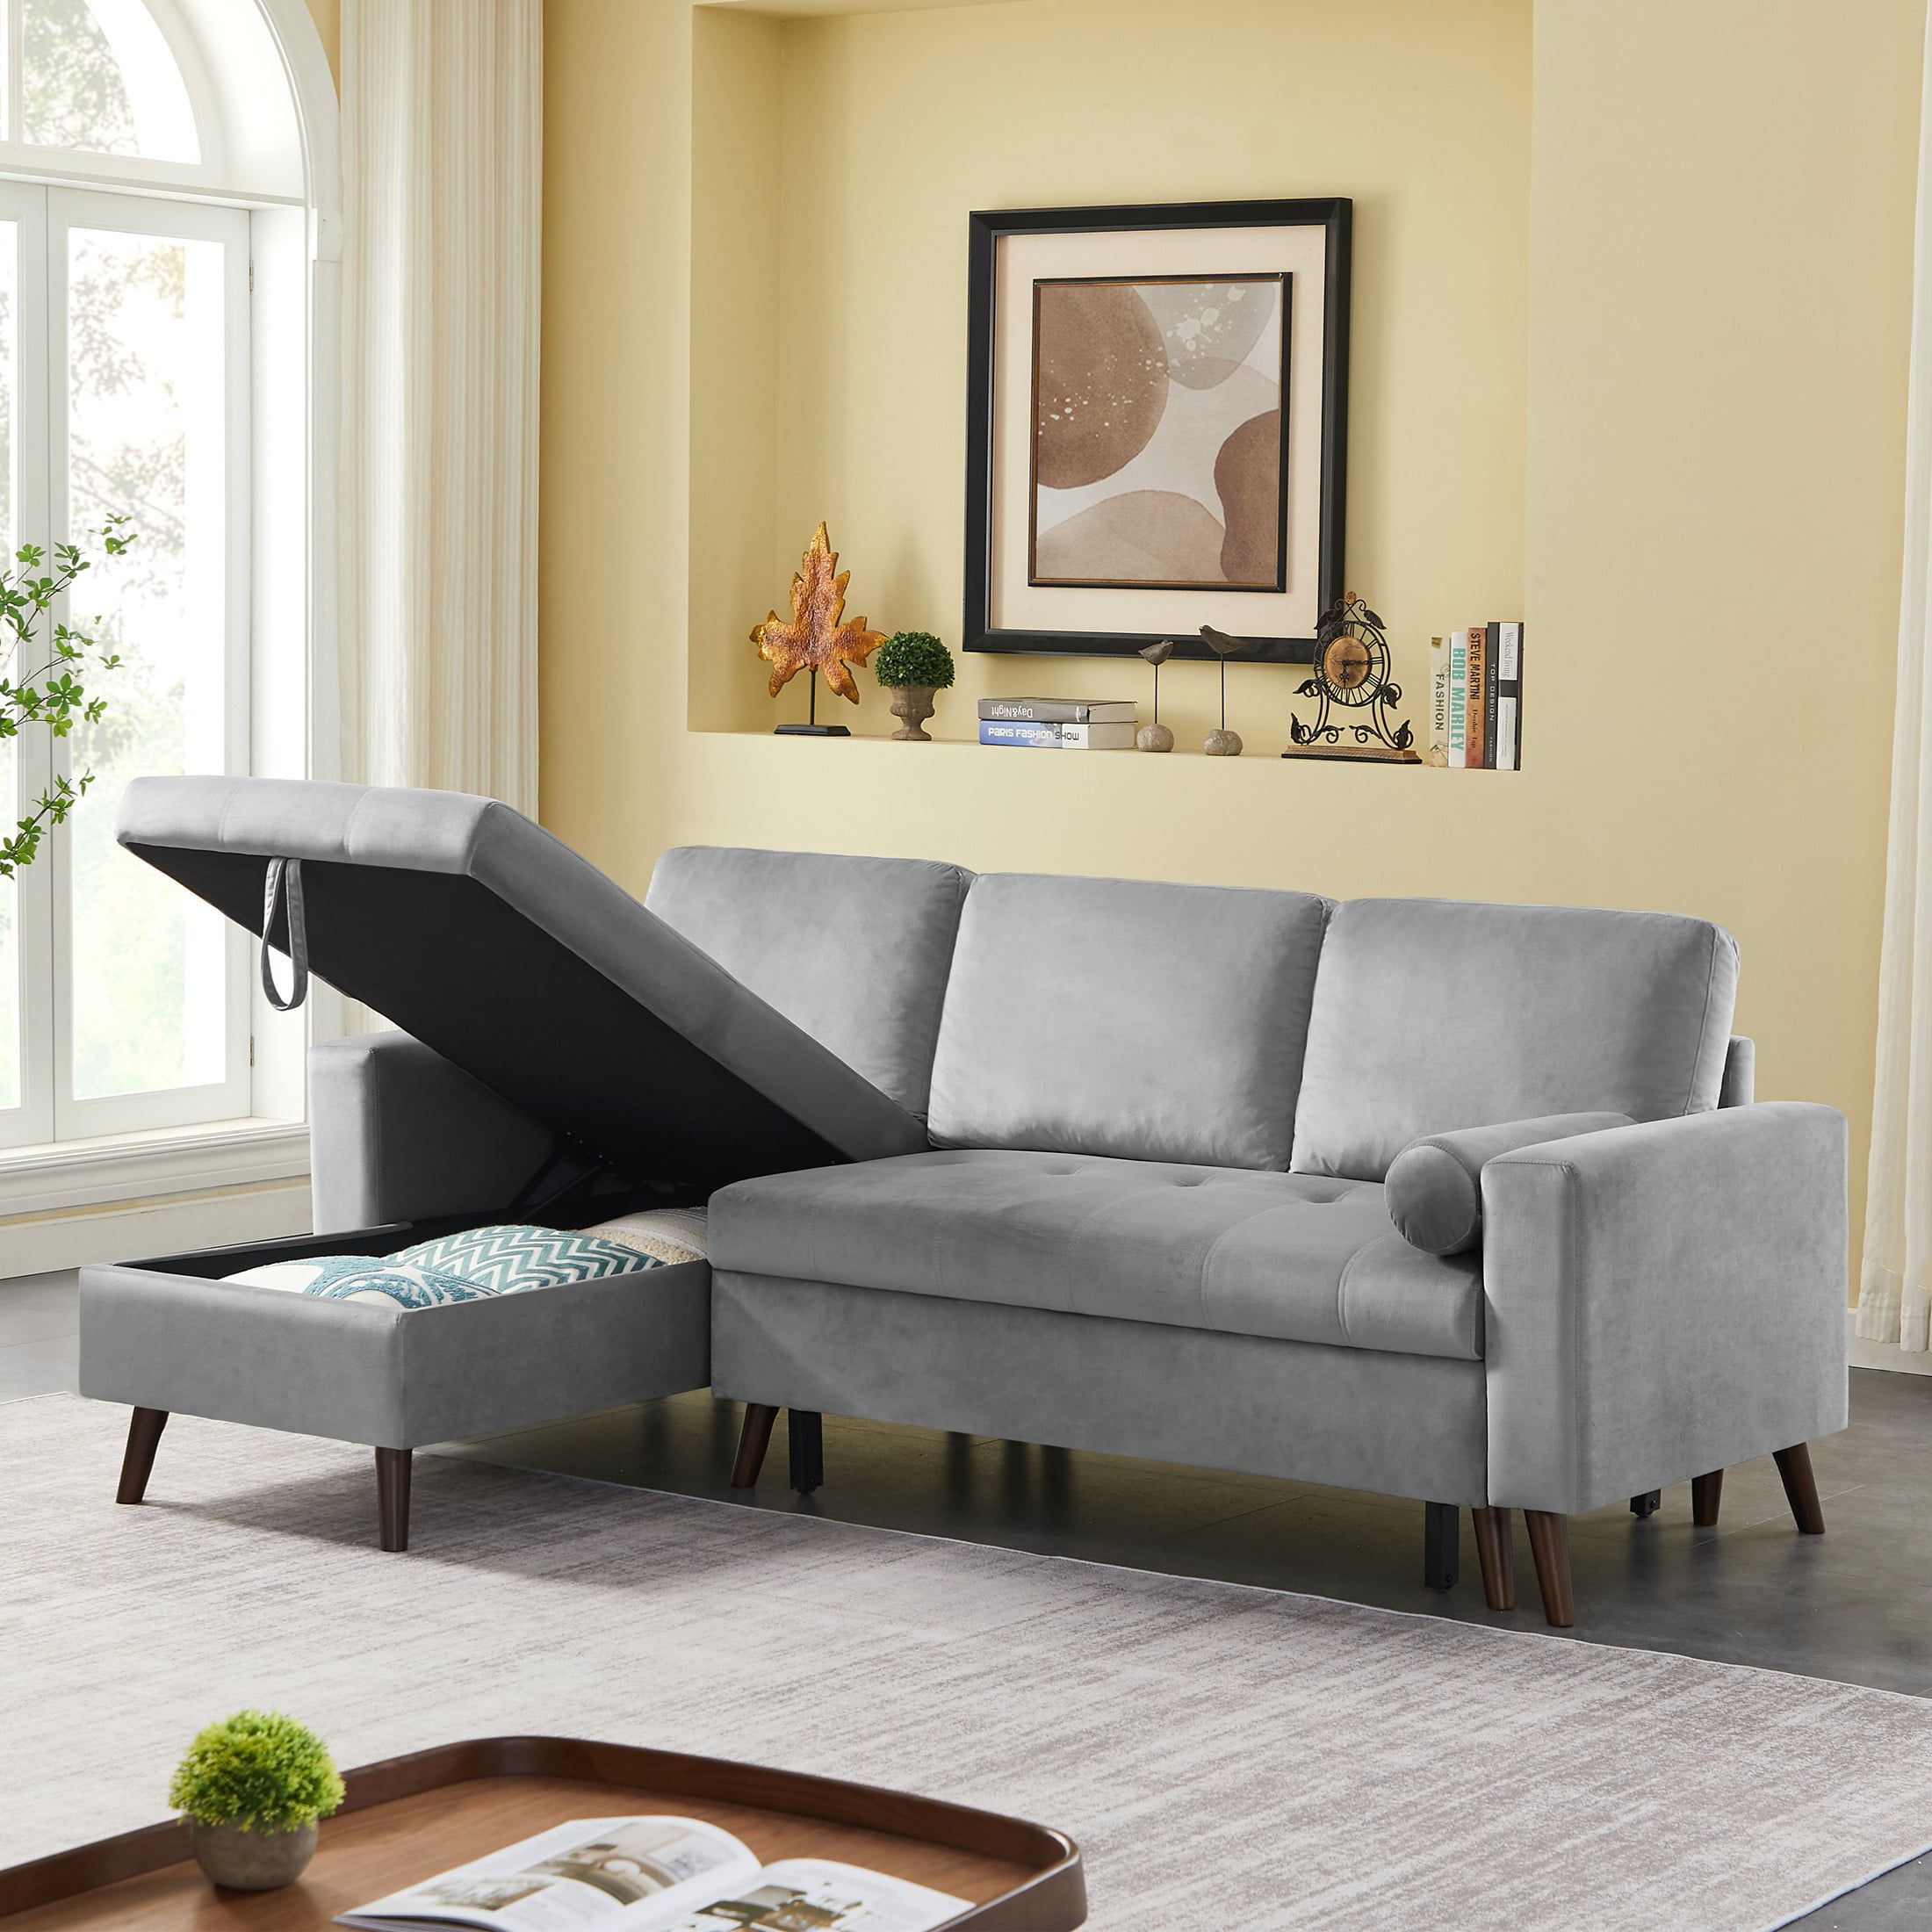 Aukfa 88" Sectional Sleeper Sofa  Pull Out Bed With Storage Chaise For  Living Room  Velvet  Gray – Walmart Intended For Convertible Sofa With Matching Chaise (View 9 of 20)